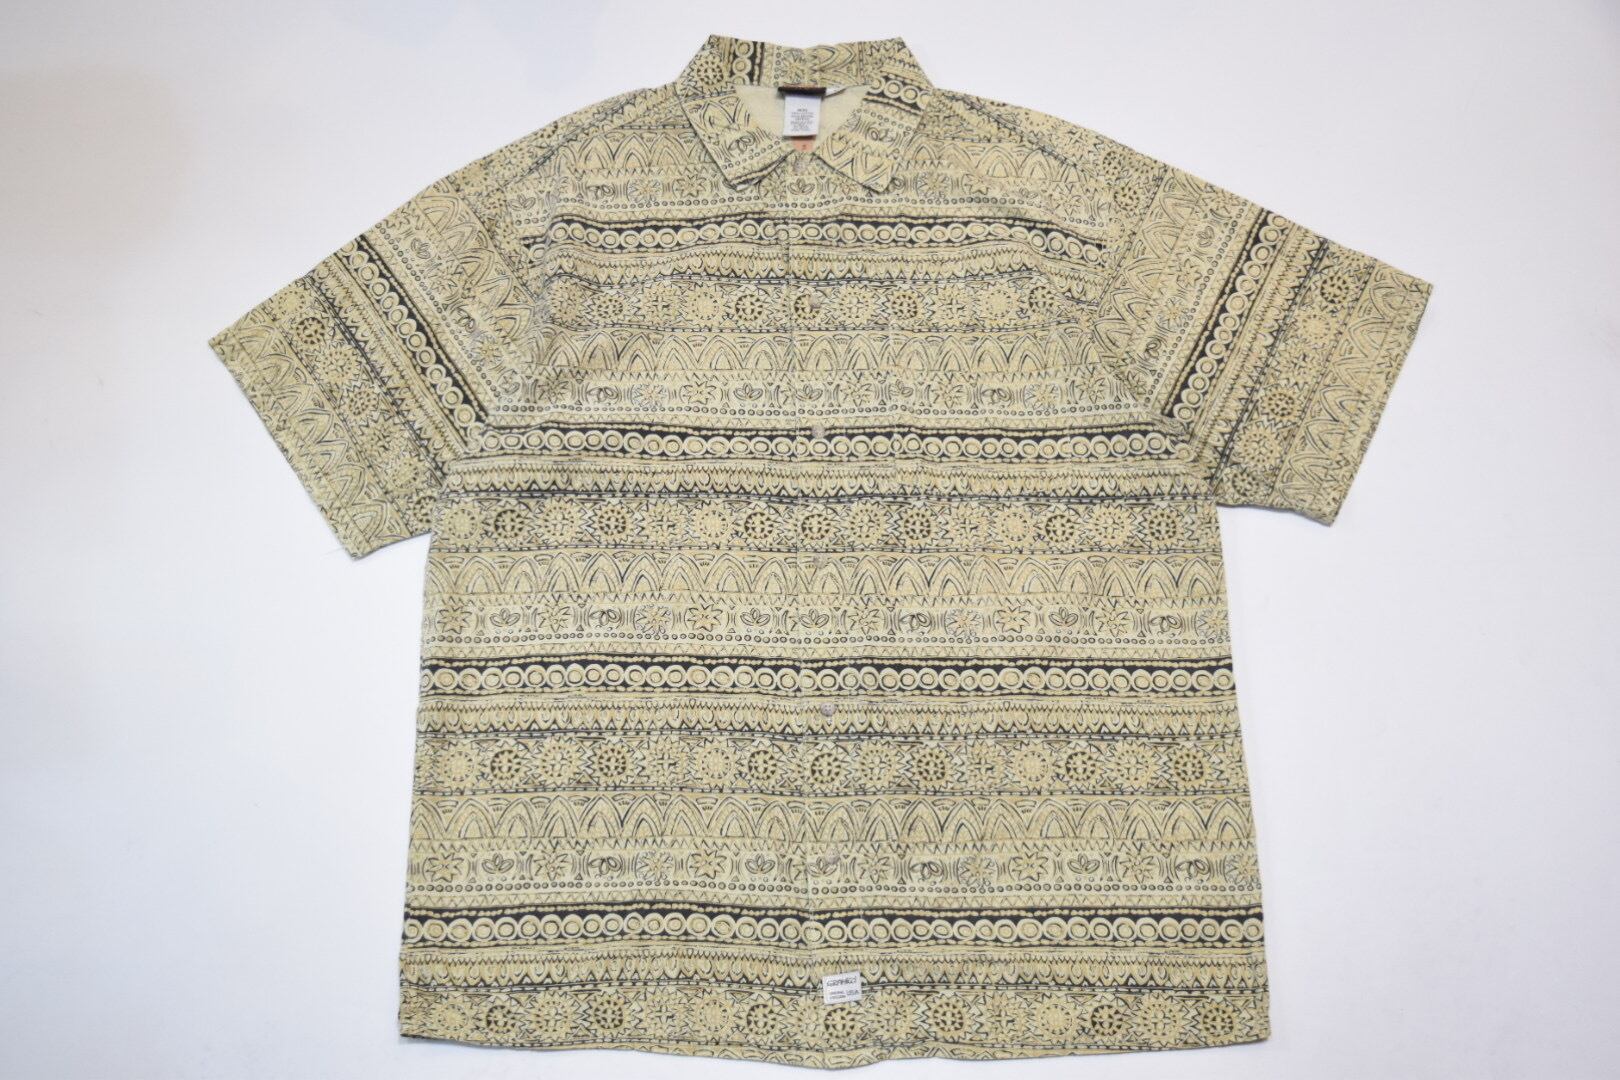 USED 90s Gramicci S/S Shirt -Large 01586